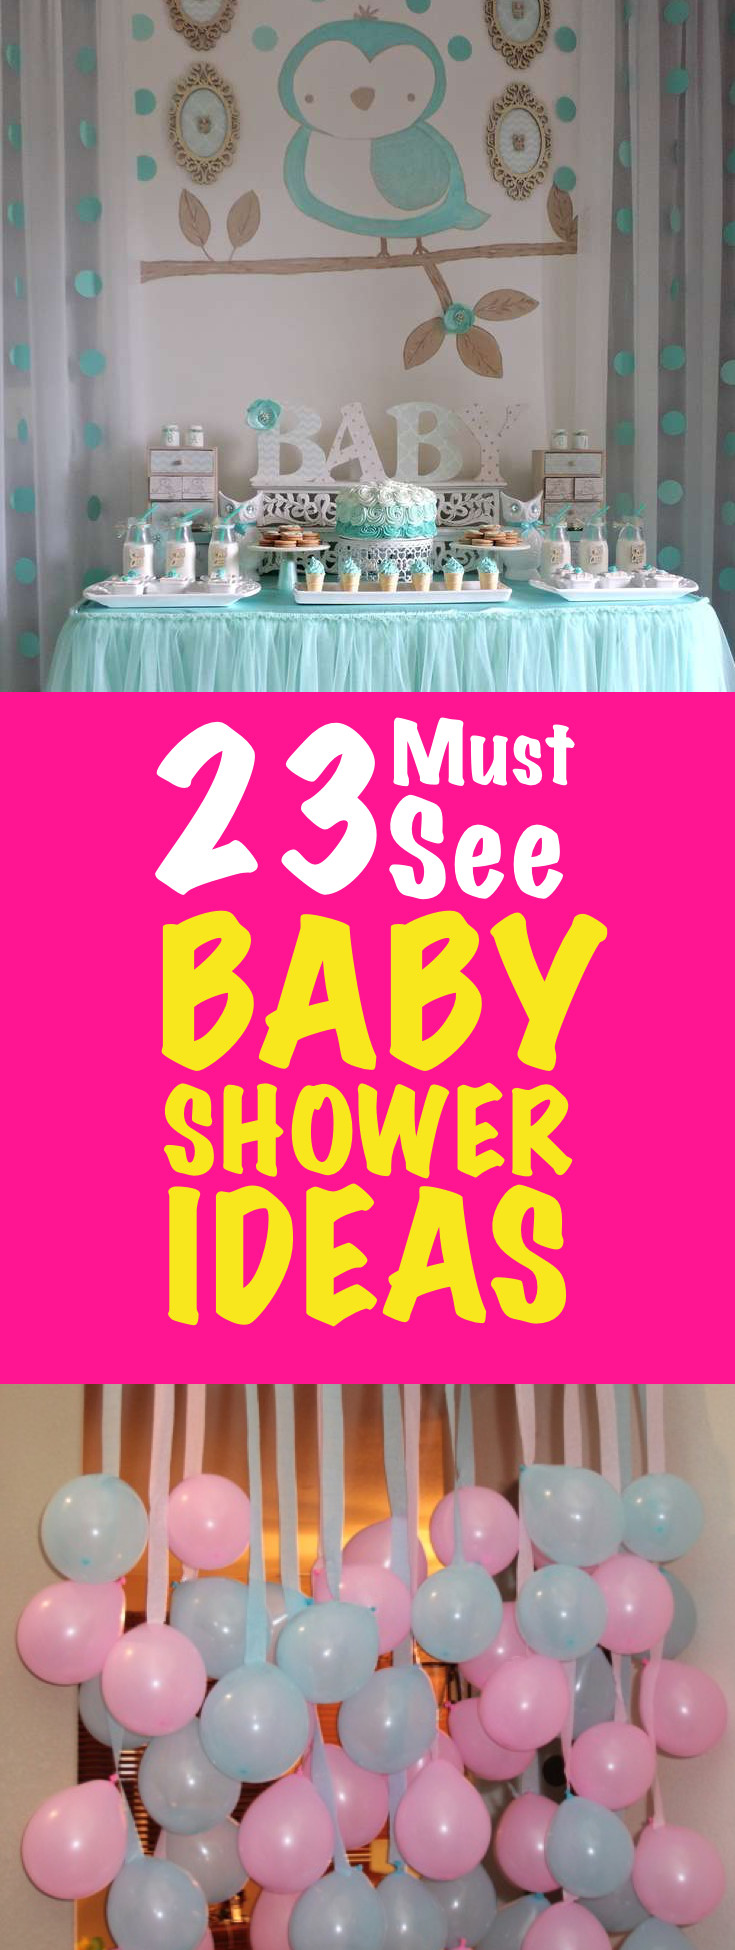 Cheap Baby Shower Decoration Ideas
 23 Must See Baby Shower Ideas